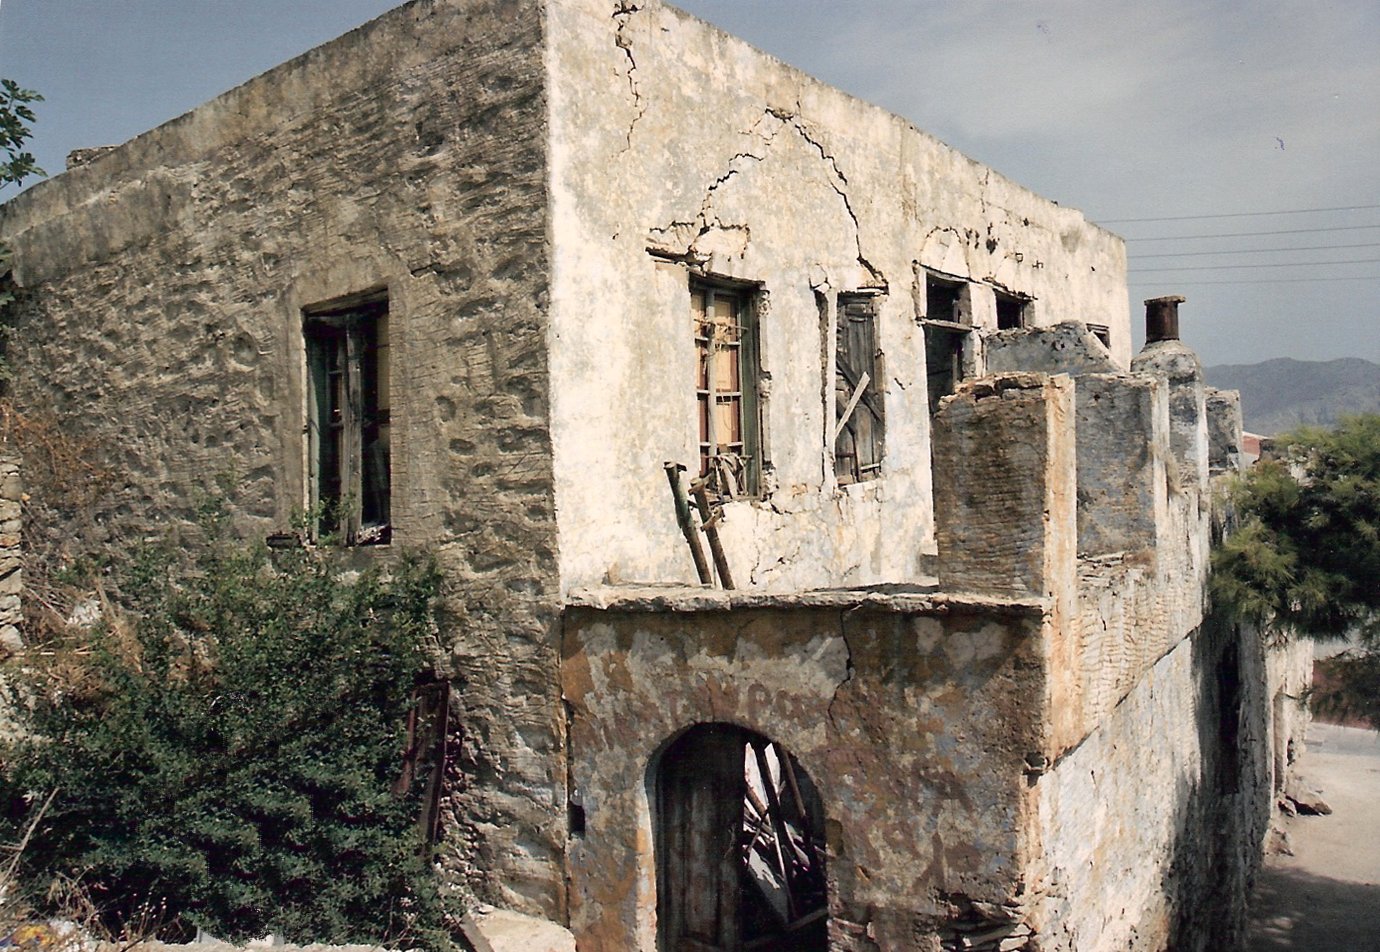 RENOVATION PROJECT for Sale - DODECANESE ISLANDS